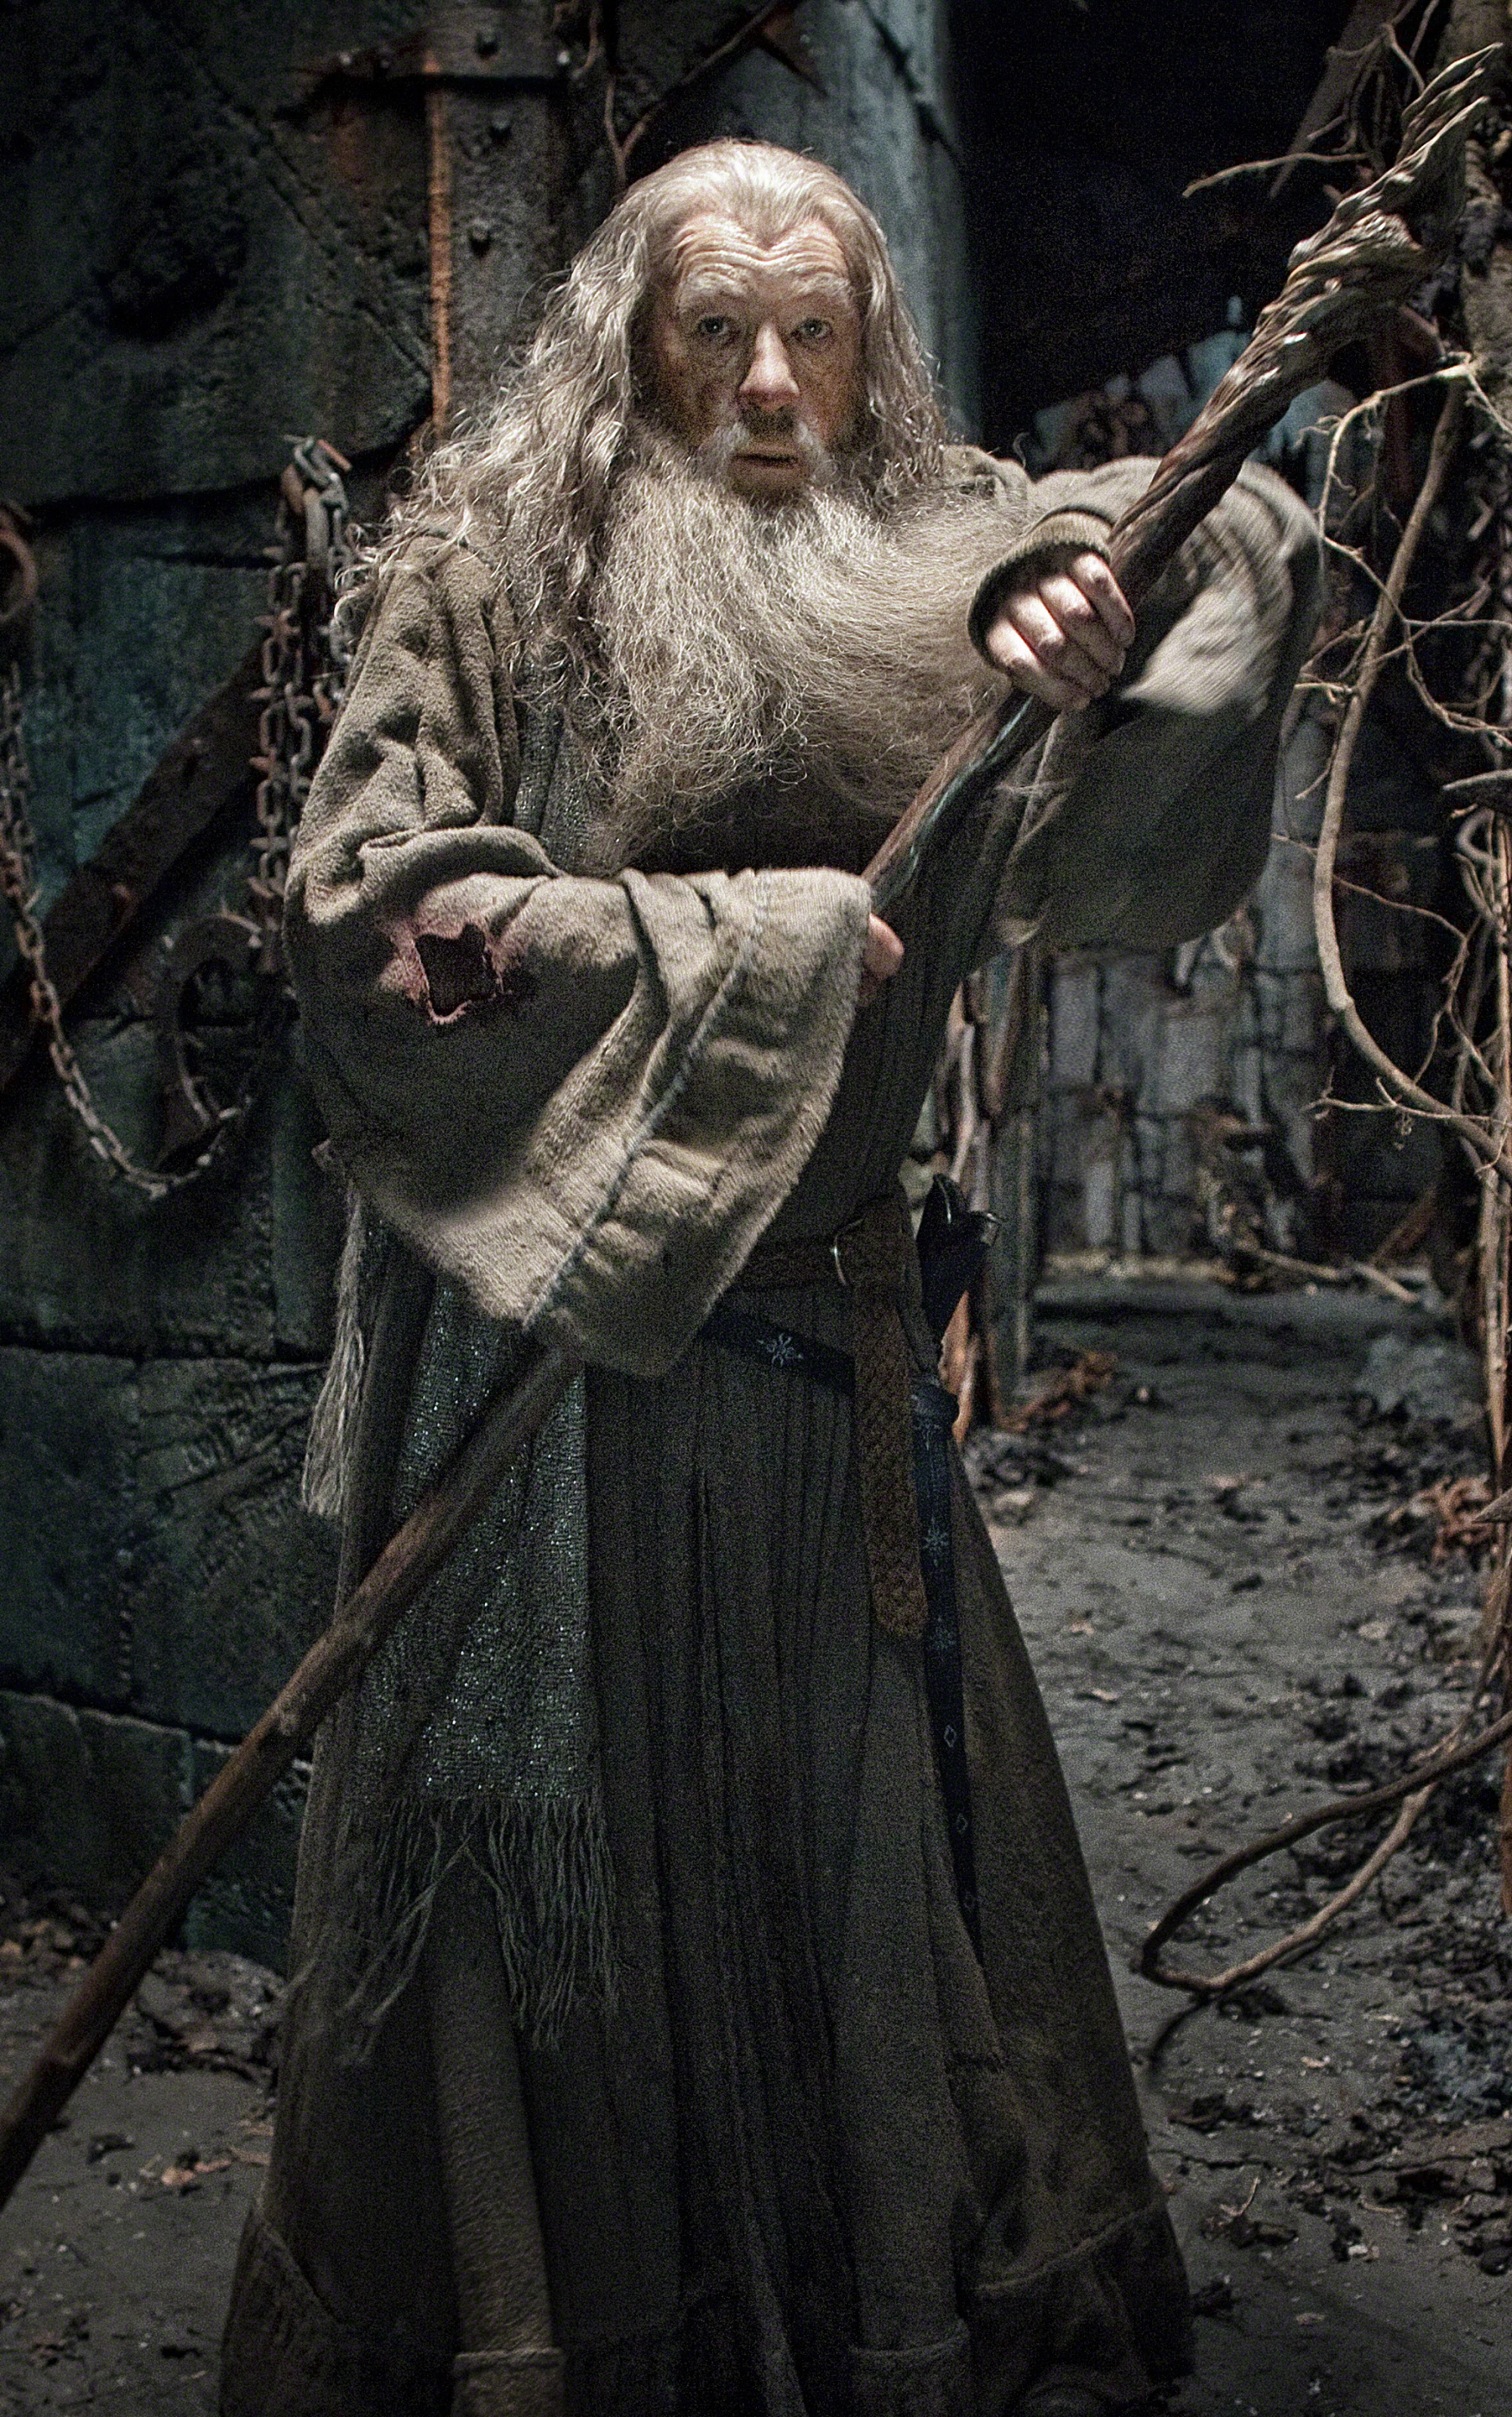 The Hobbit: The Desolation of Smaug Phone Wallpaper